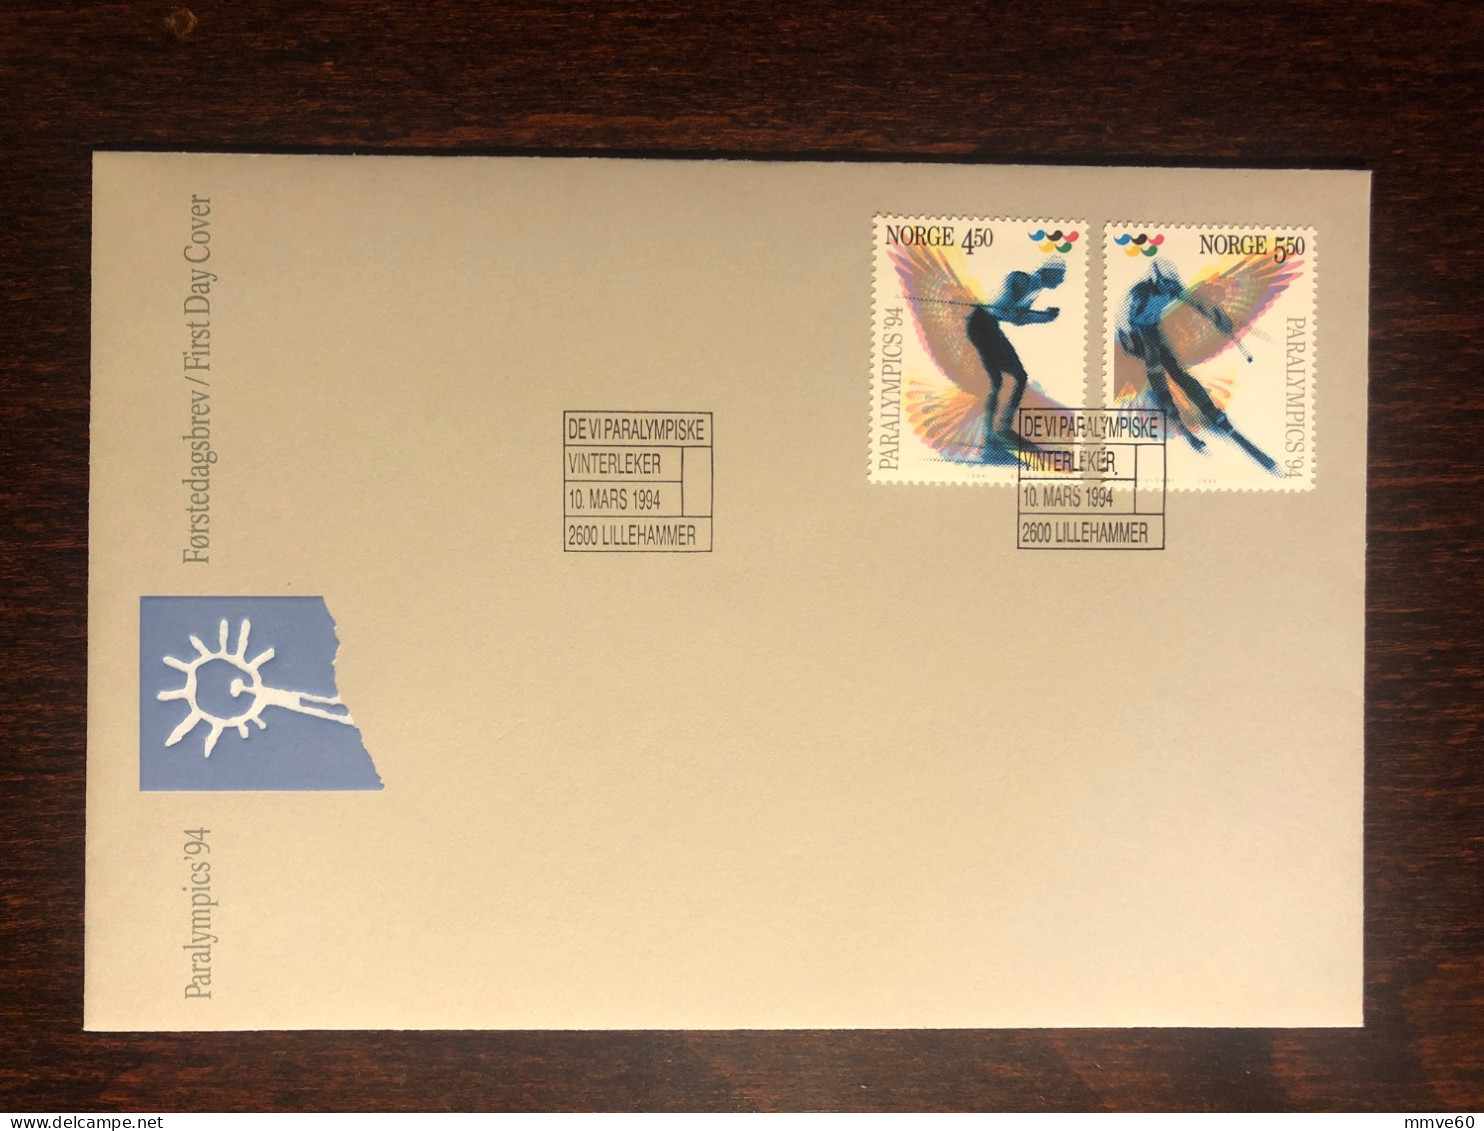 NORWAY FDC COVER 1994 YEAR  PARALYMPICS DISABLED SPORTS HEALTH MEDICINE STAMPS - FDC